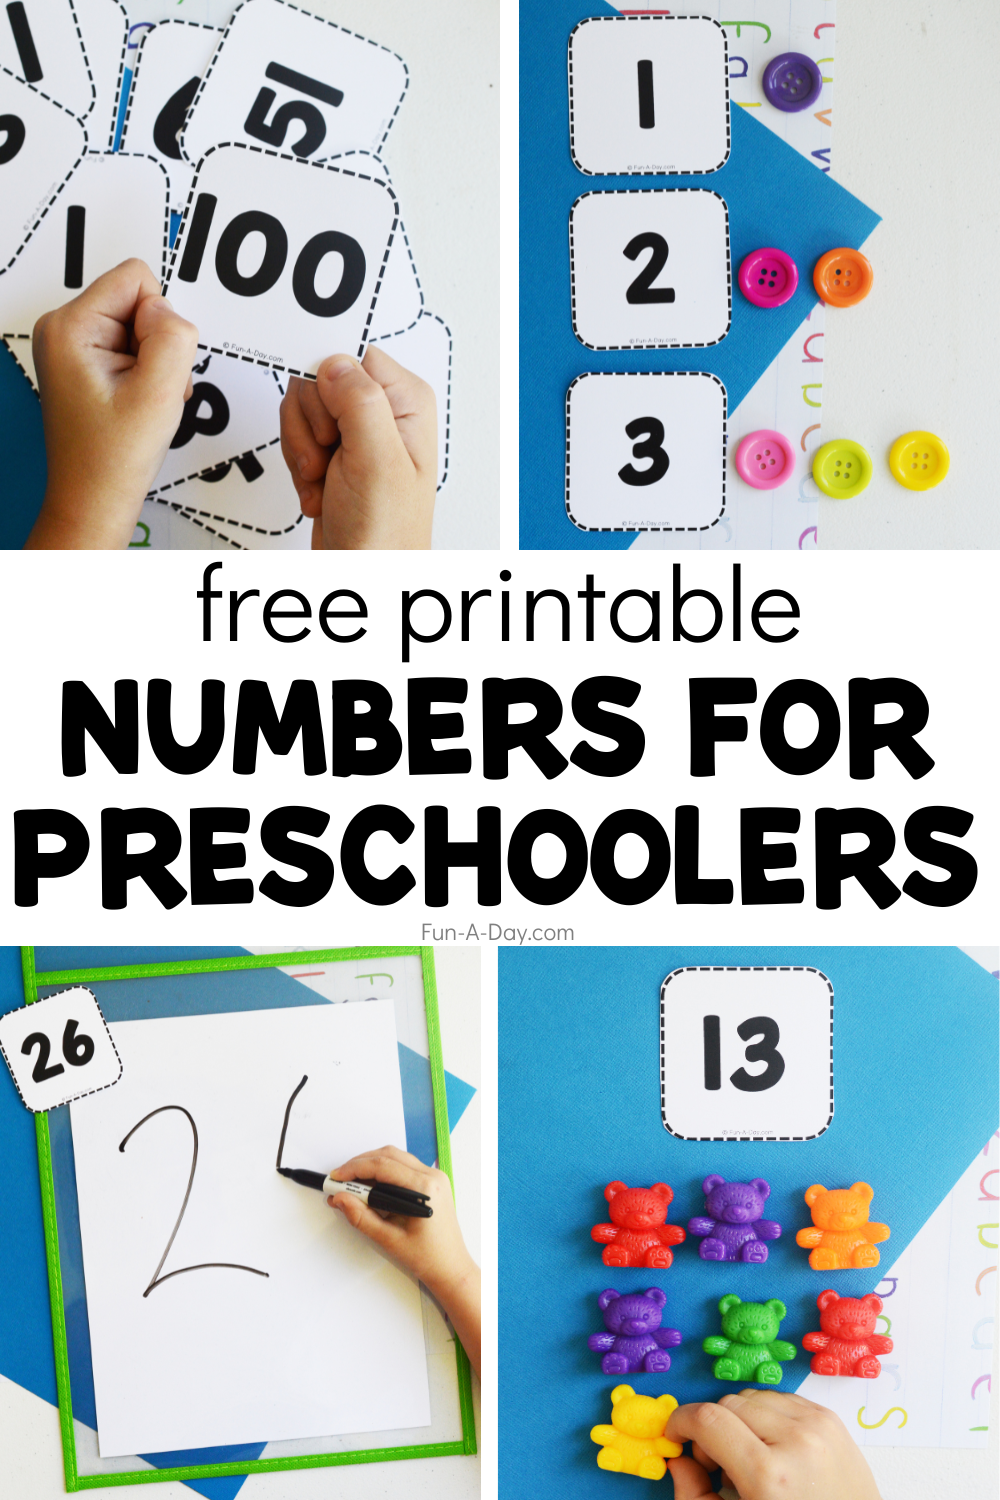 multiple uses of number cards with text that reads free printable numbers for preschoolers